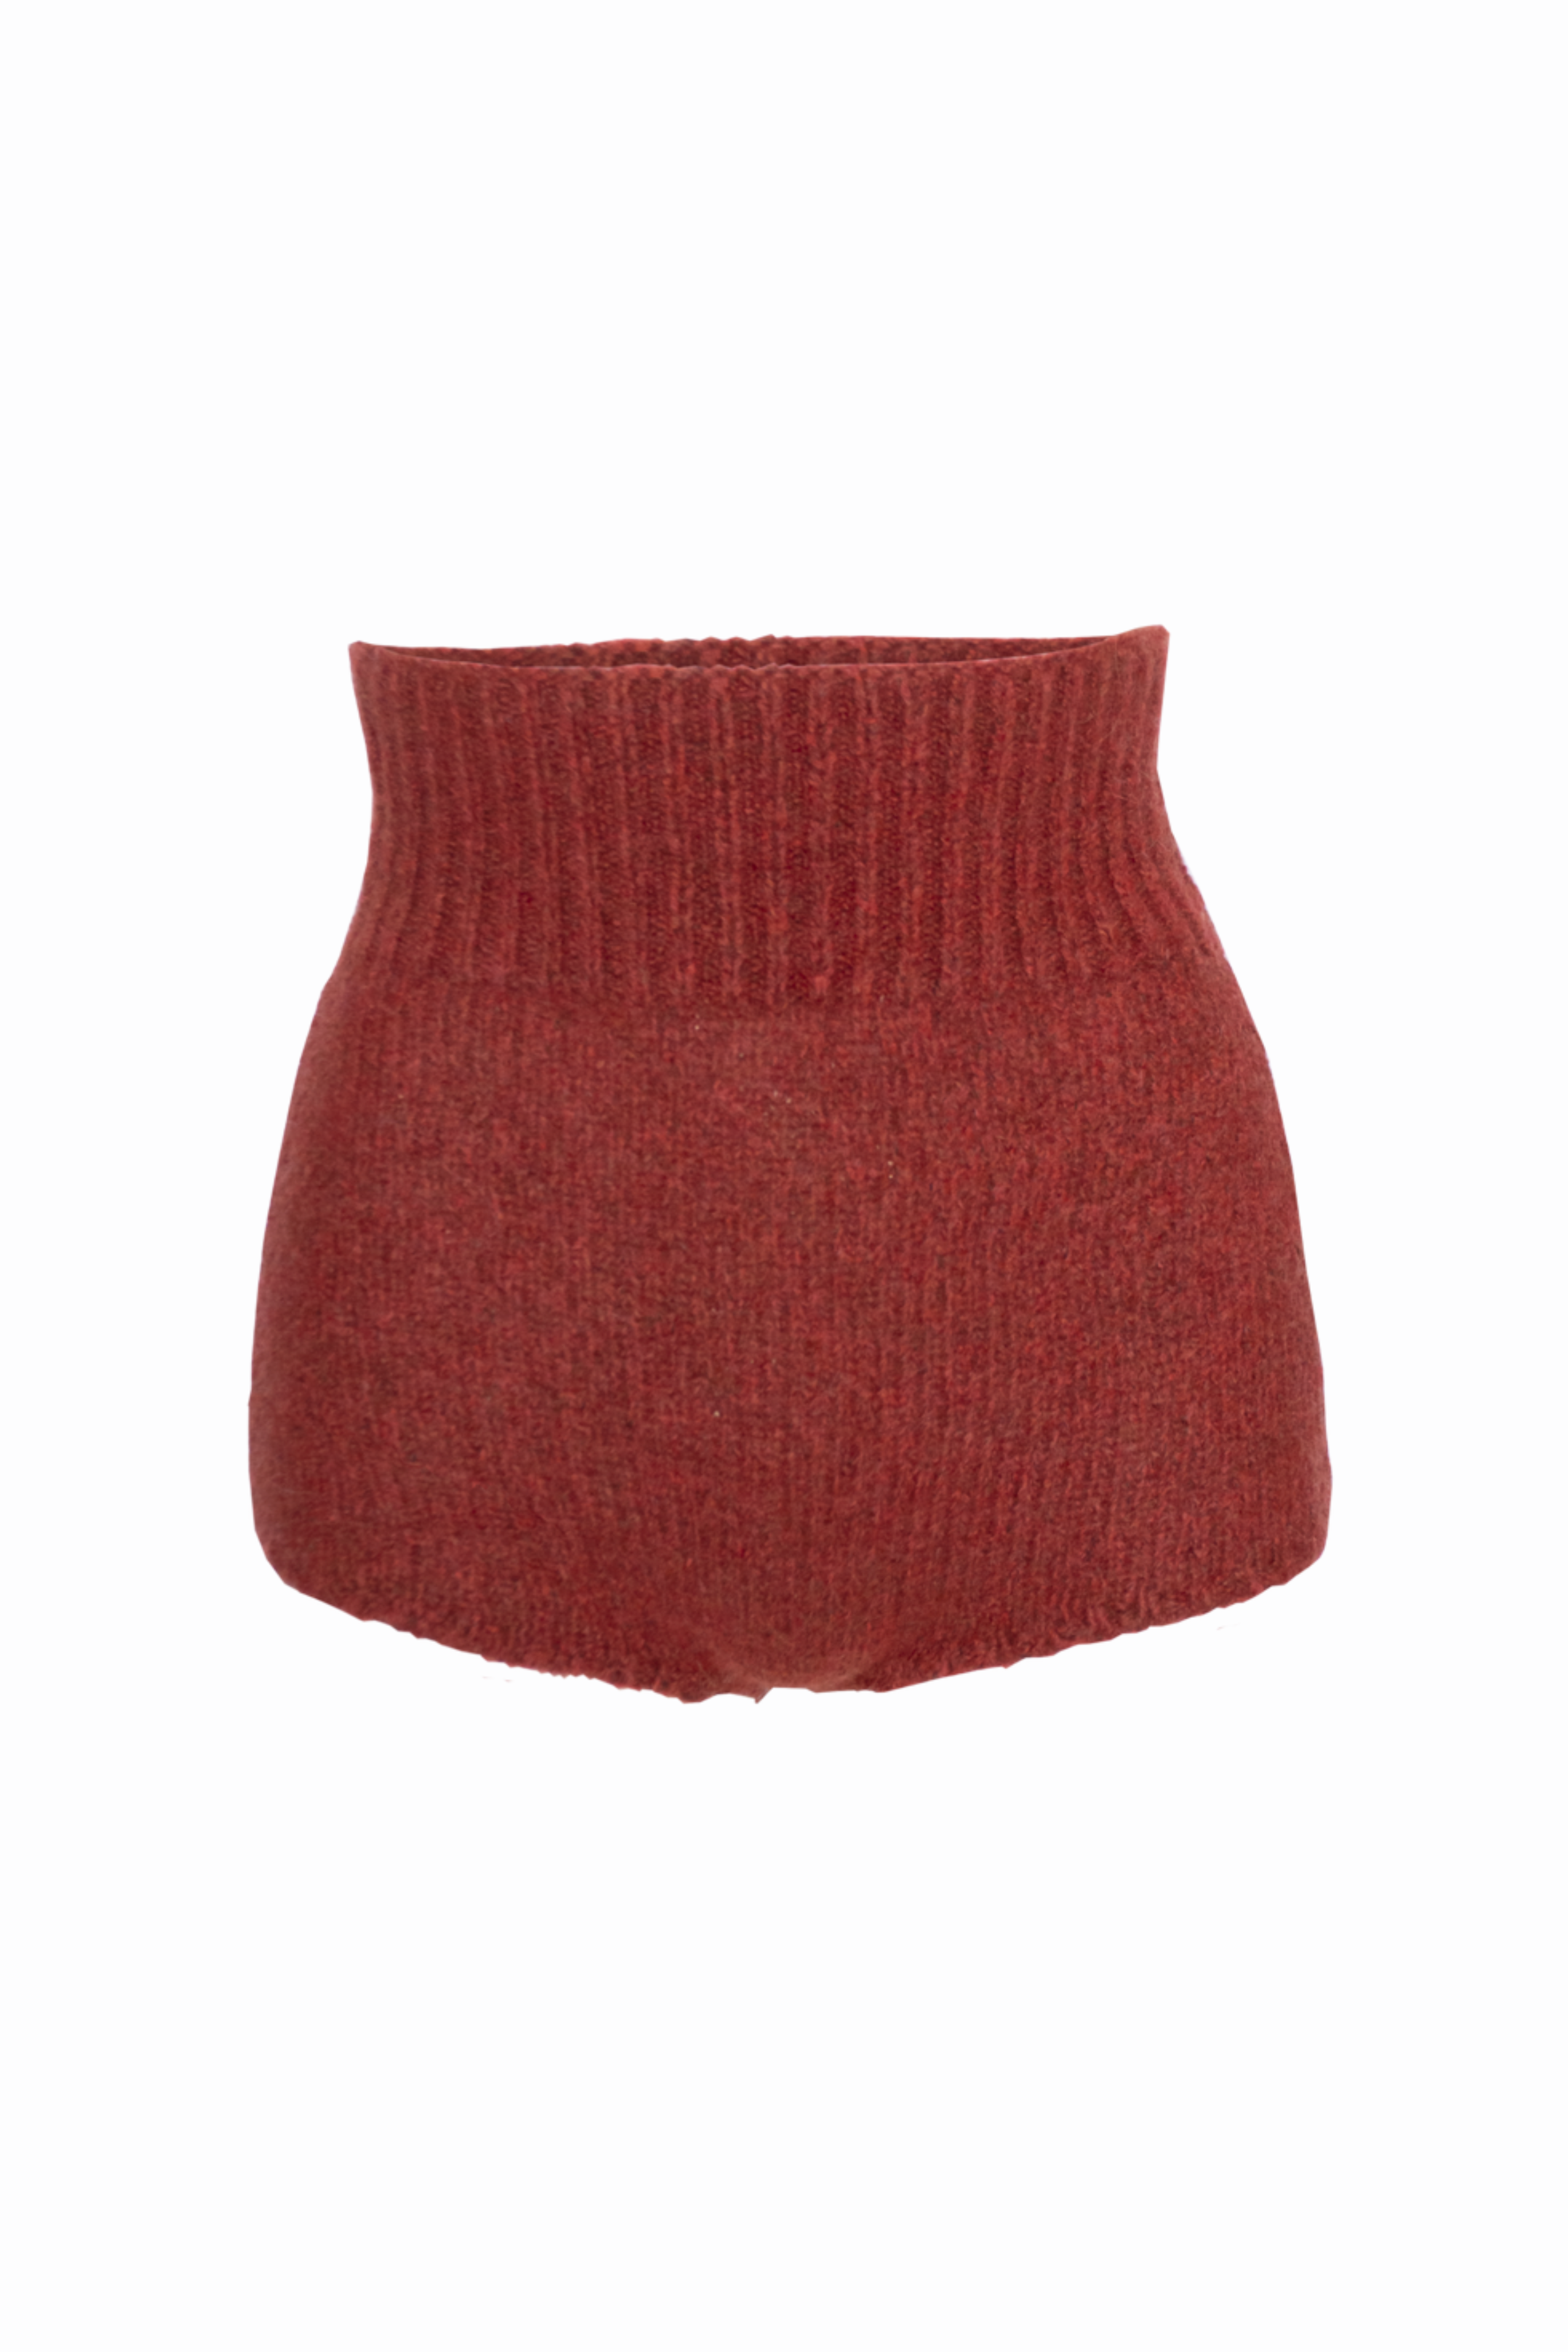 AISLING CAMPS Micro Knit Shorts